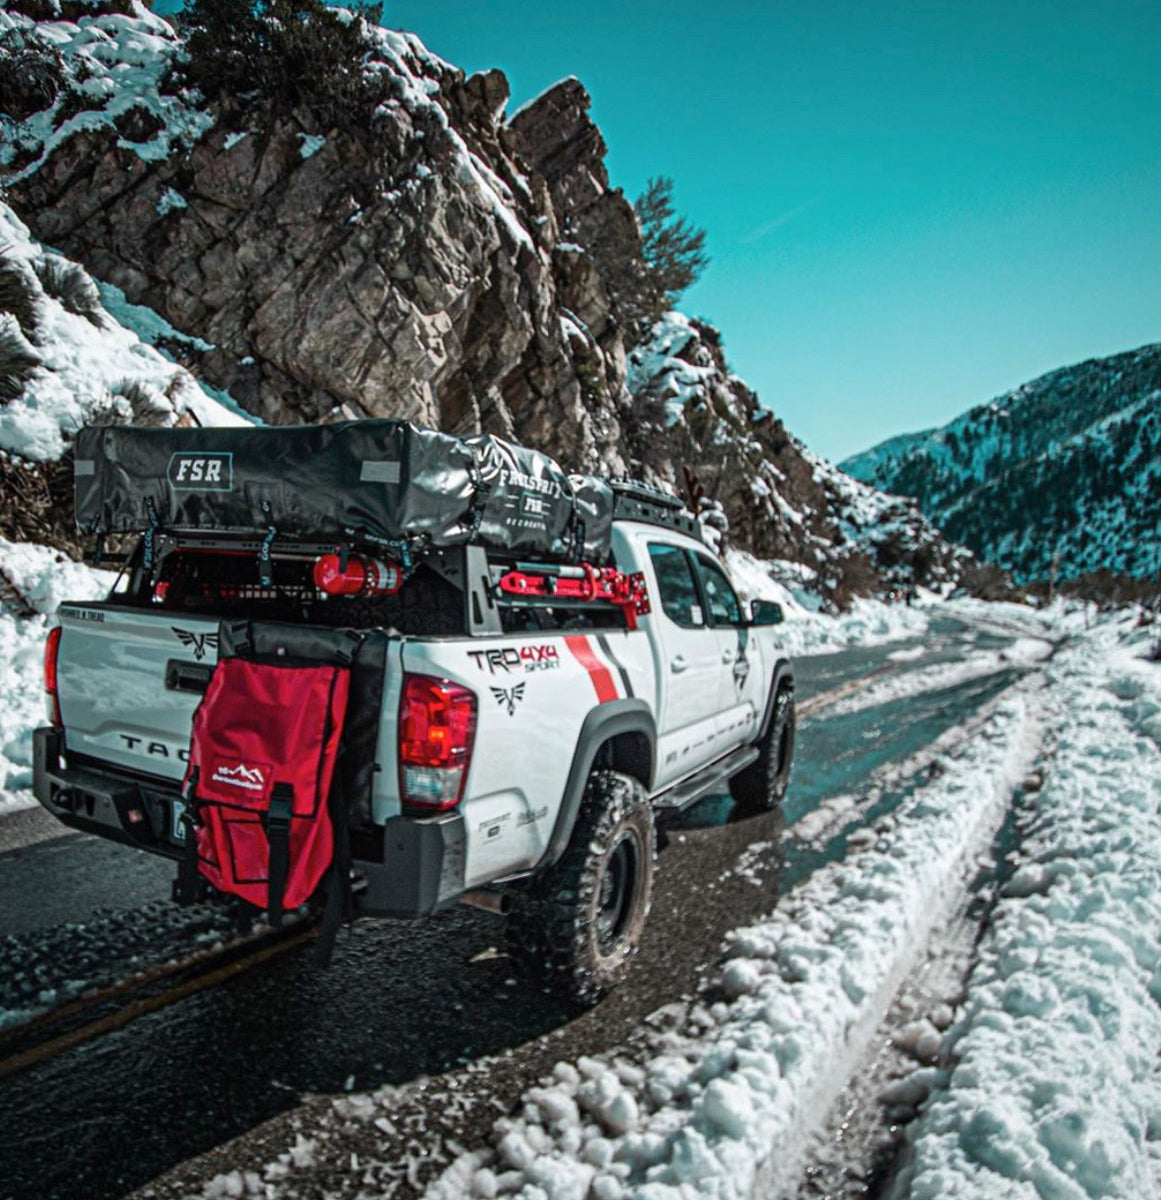 Trd, trd pro, camping hat, snow mountains, Toyota